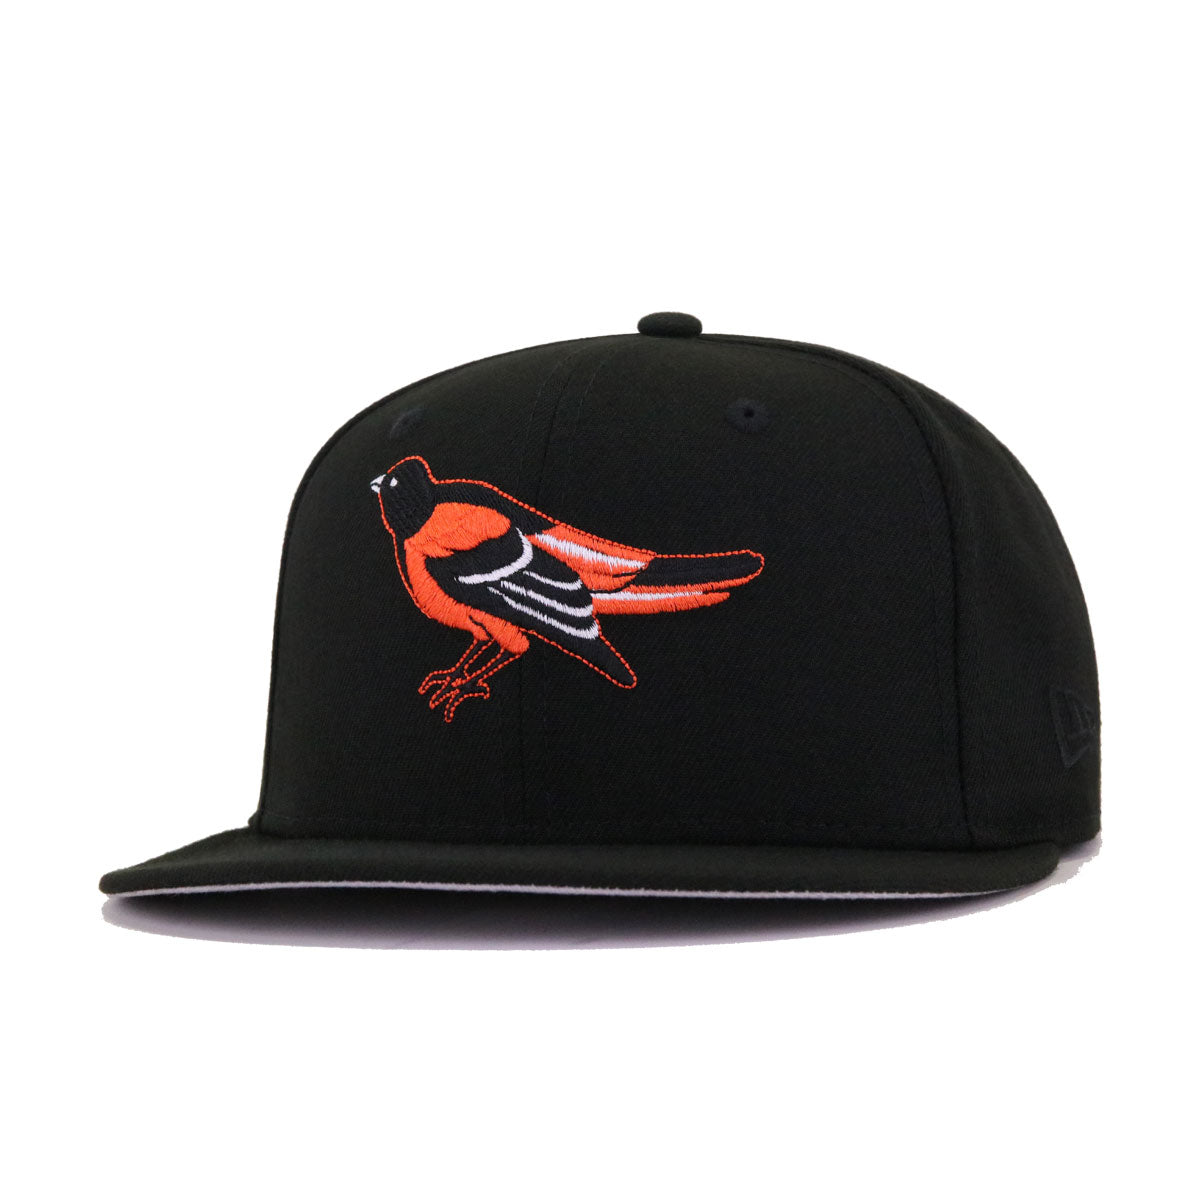 Shop Baltimore Orioles Snapback Hats & Fitted Caps